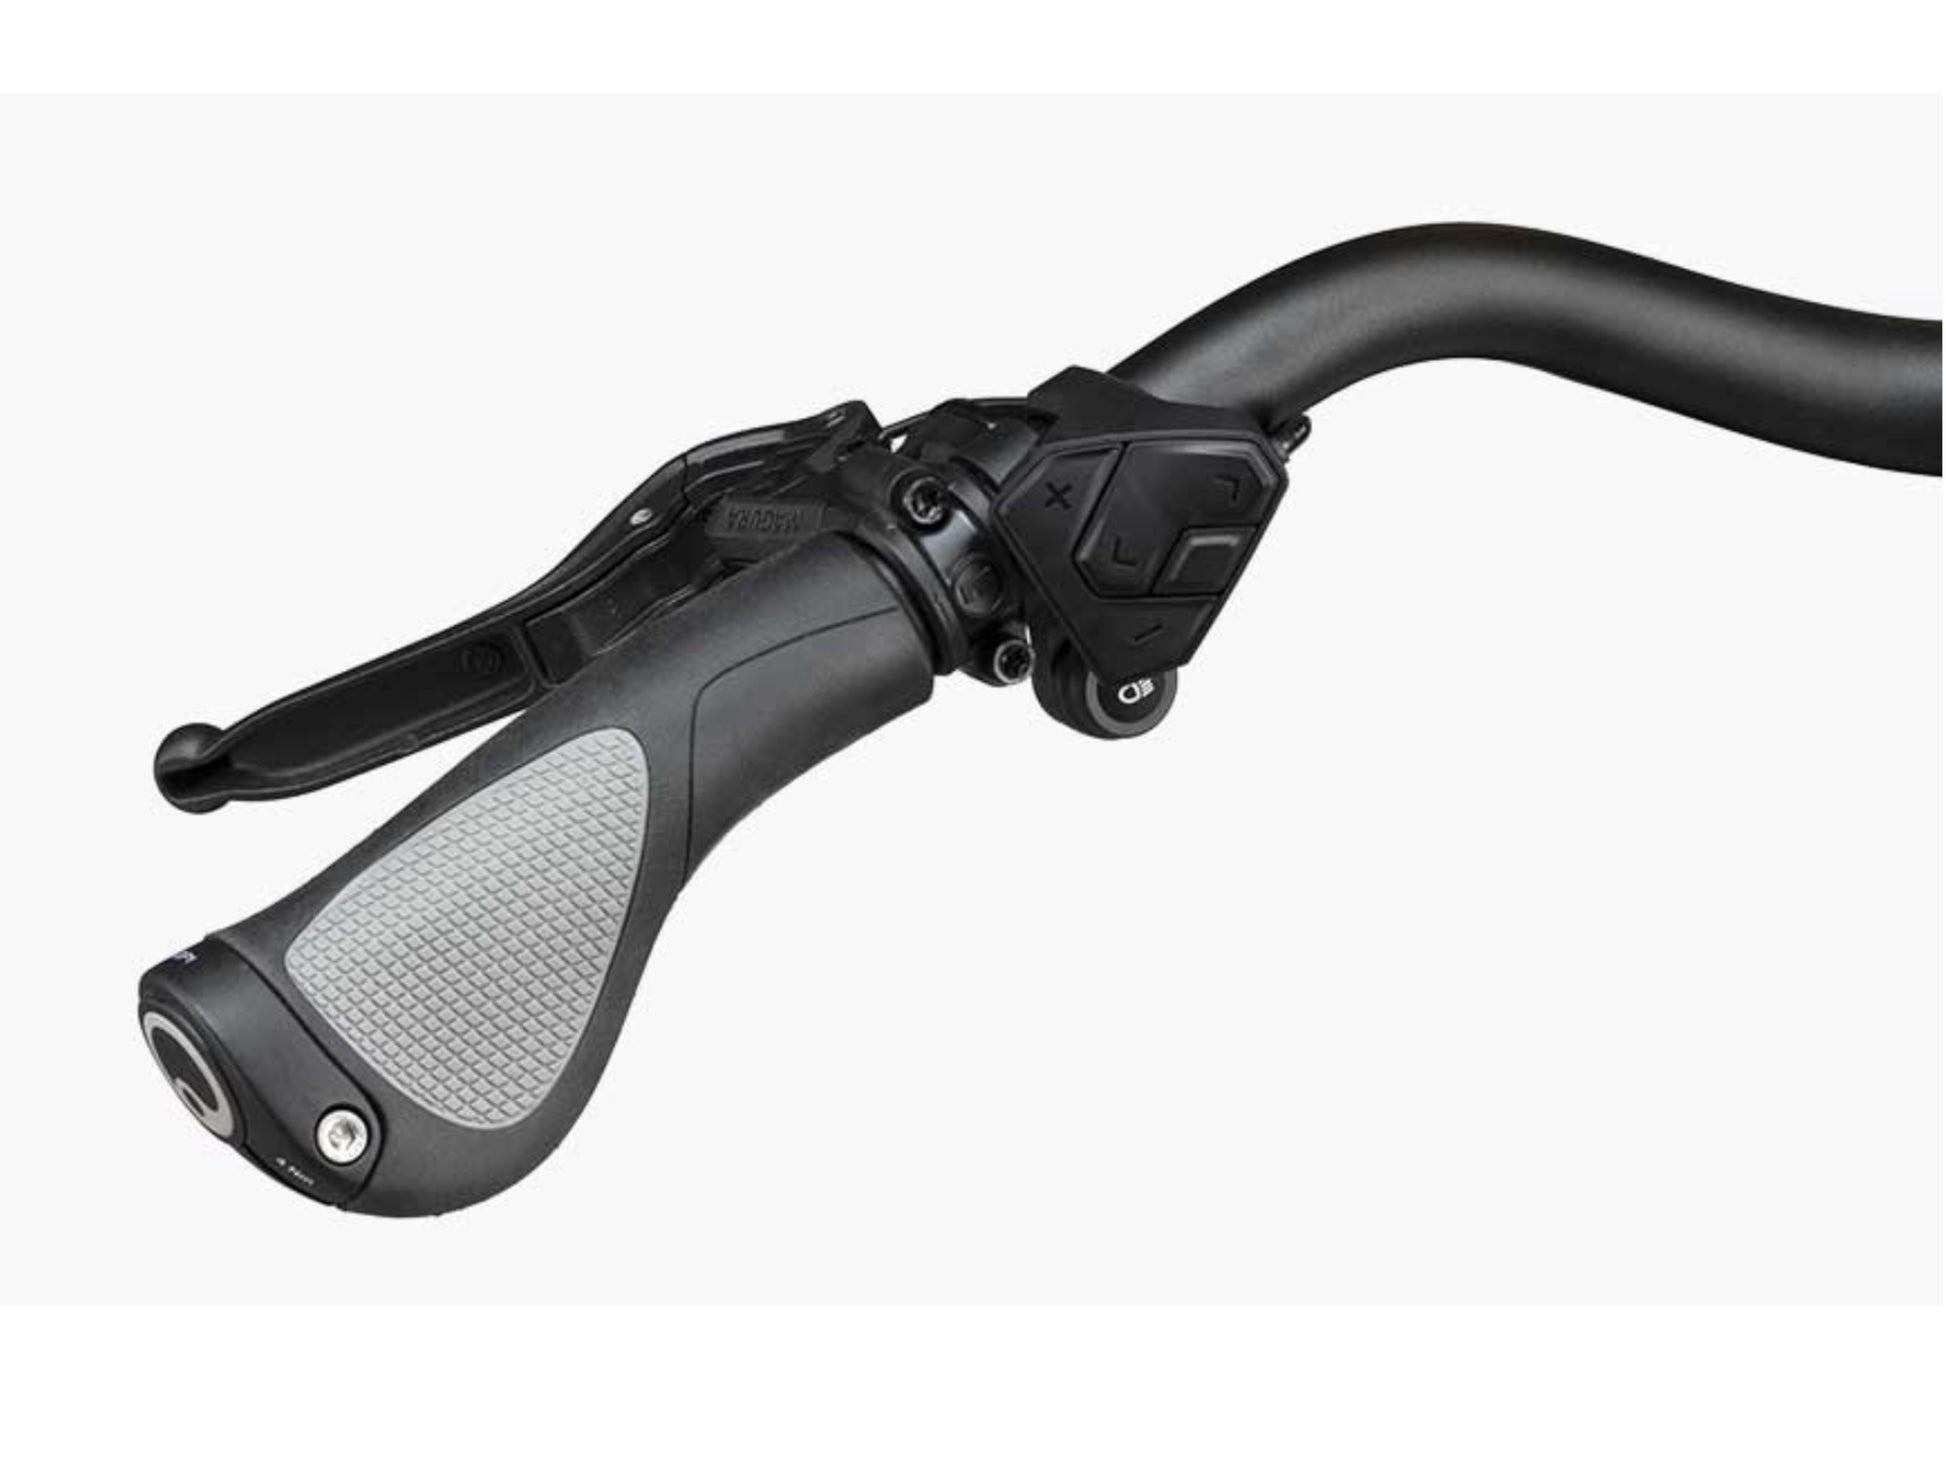 Riese and Muller Supercharger GT Touring HS emtb hardtail close up comfort kit option